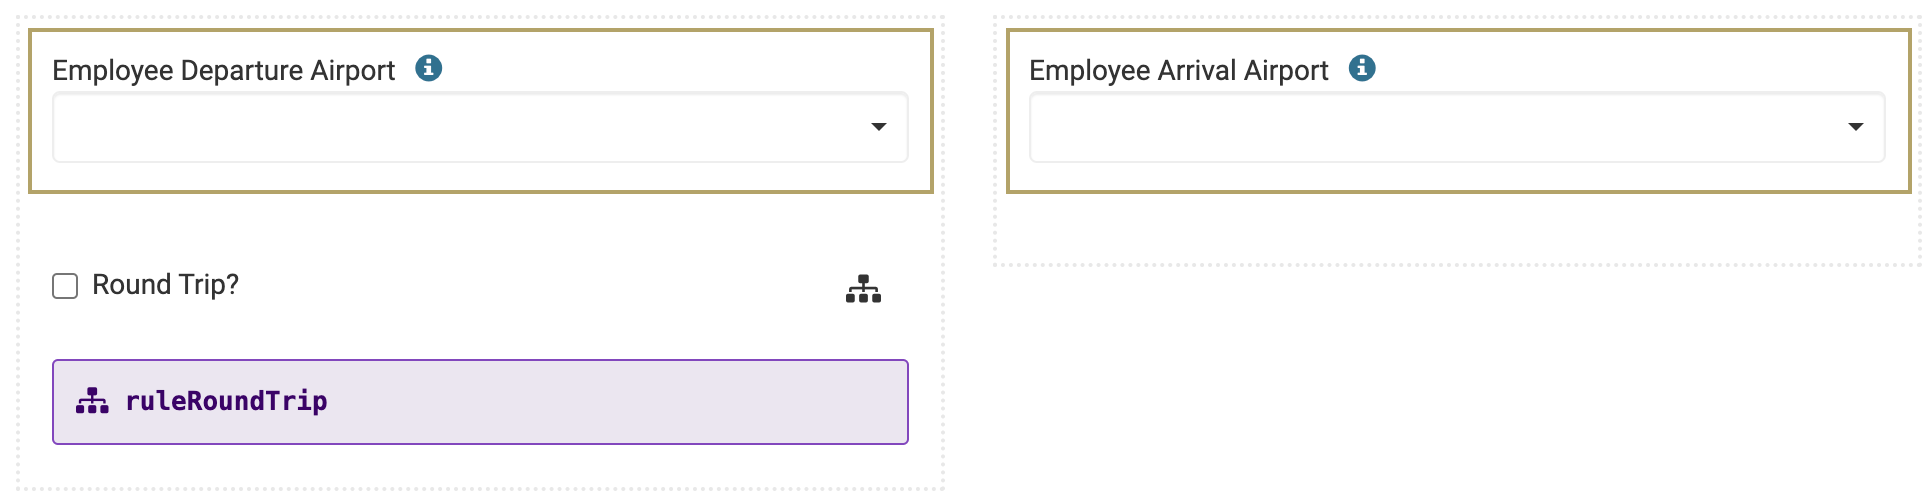 Image showing the employeeDepartureAirport and employeeArrivalAirport Address Search component configuration in the Employee Travel Information module.